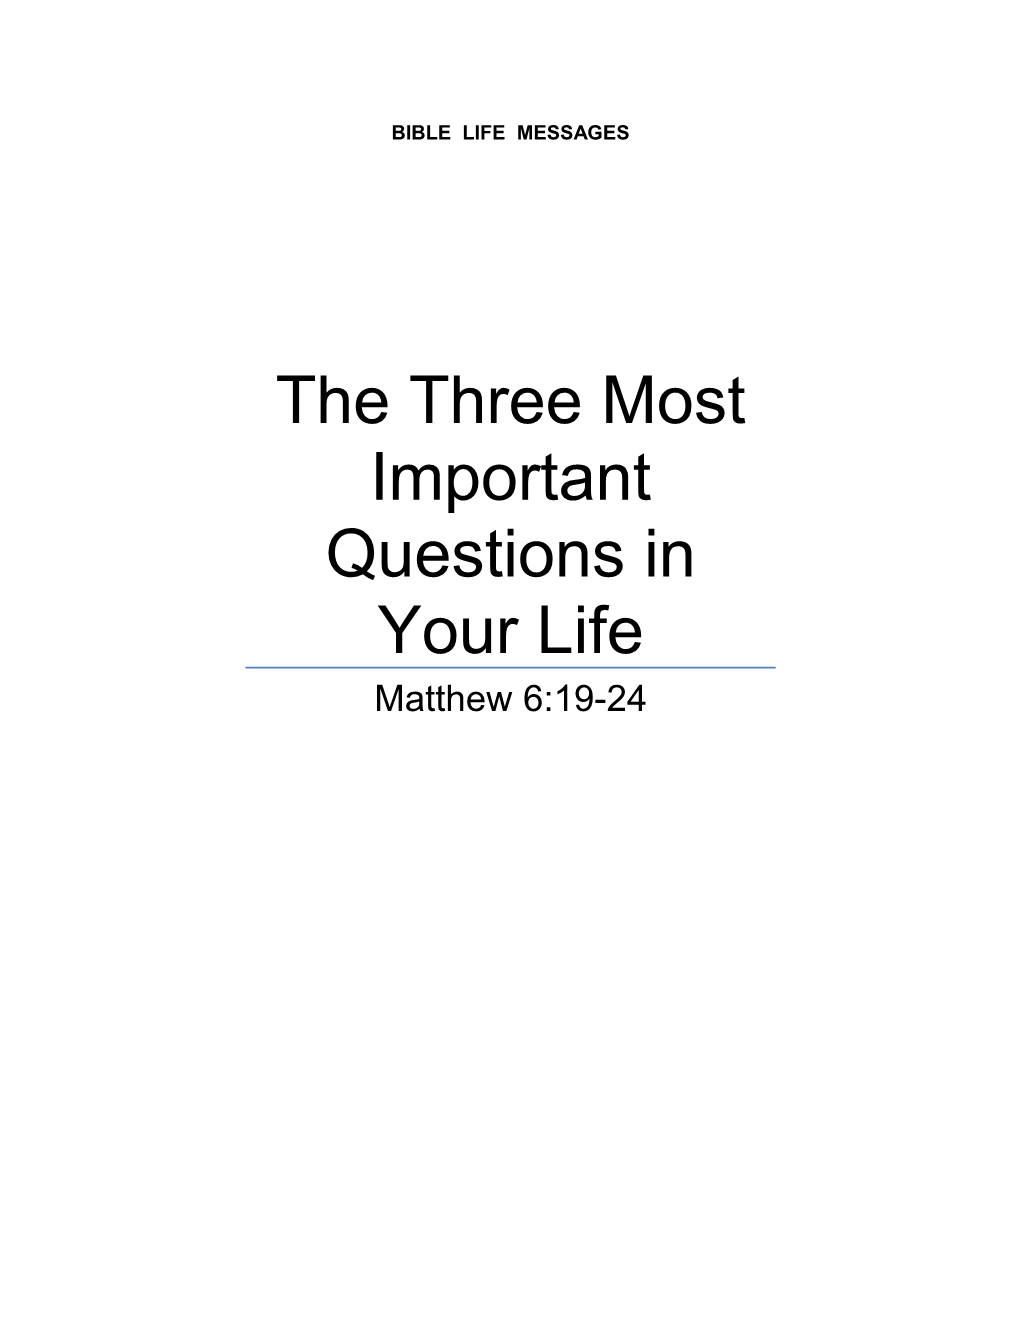 The Three Most Important Questions in Your Life